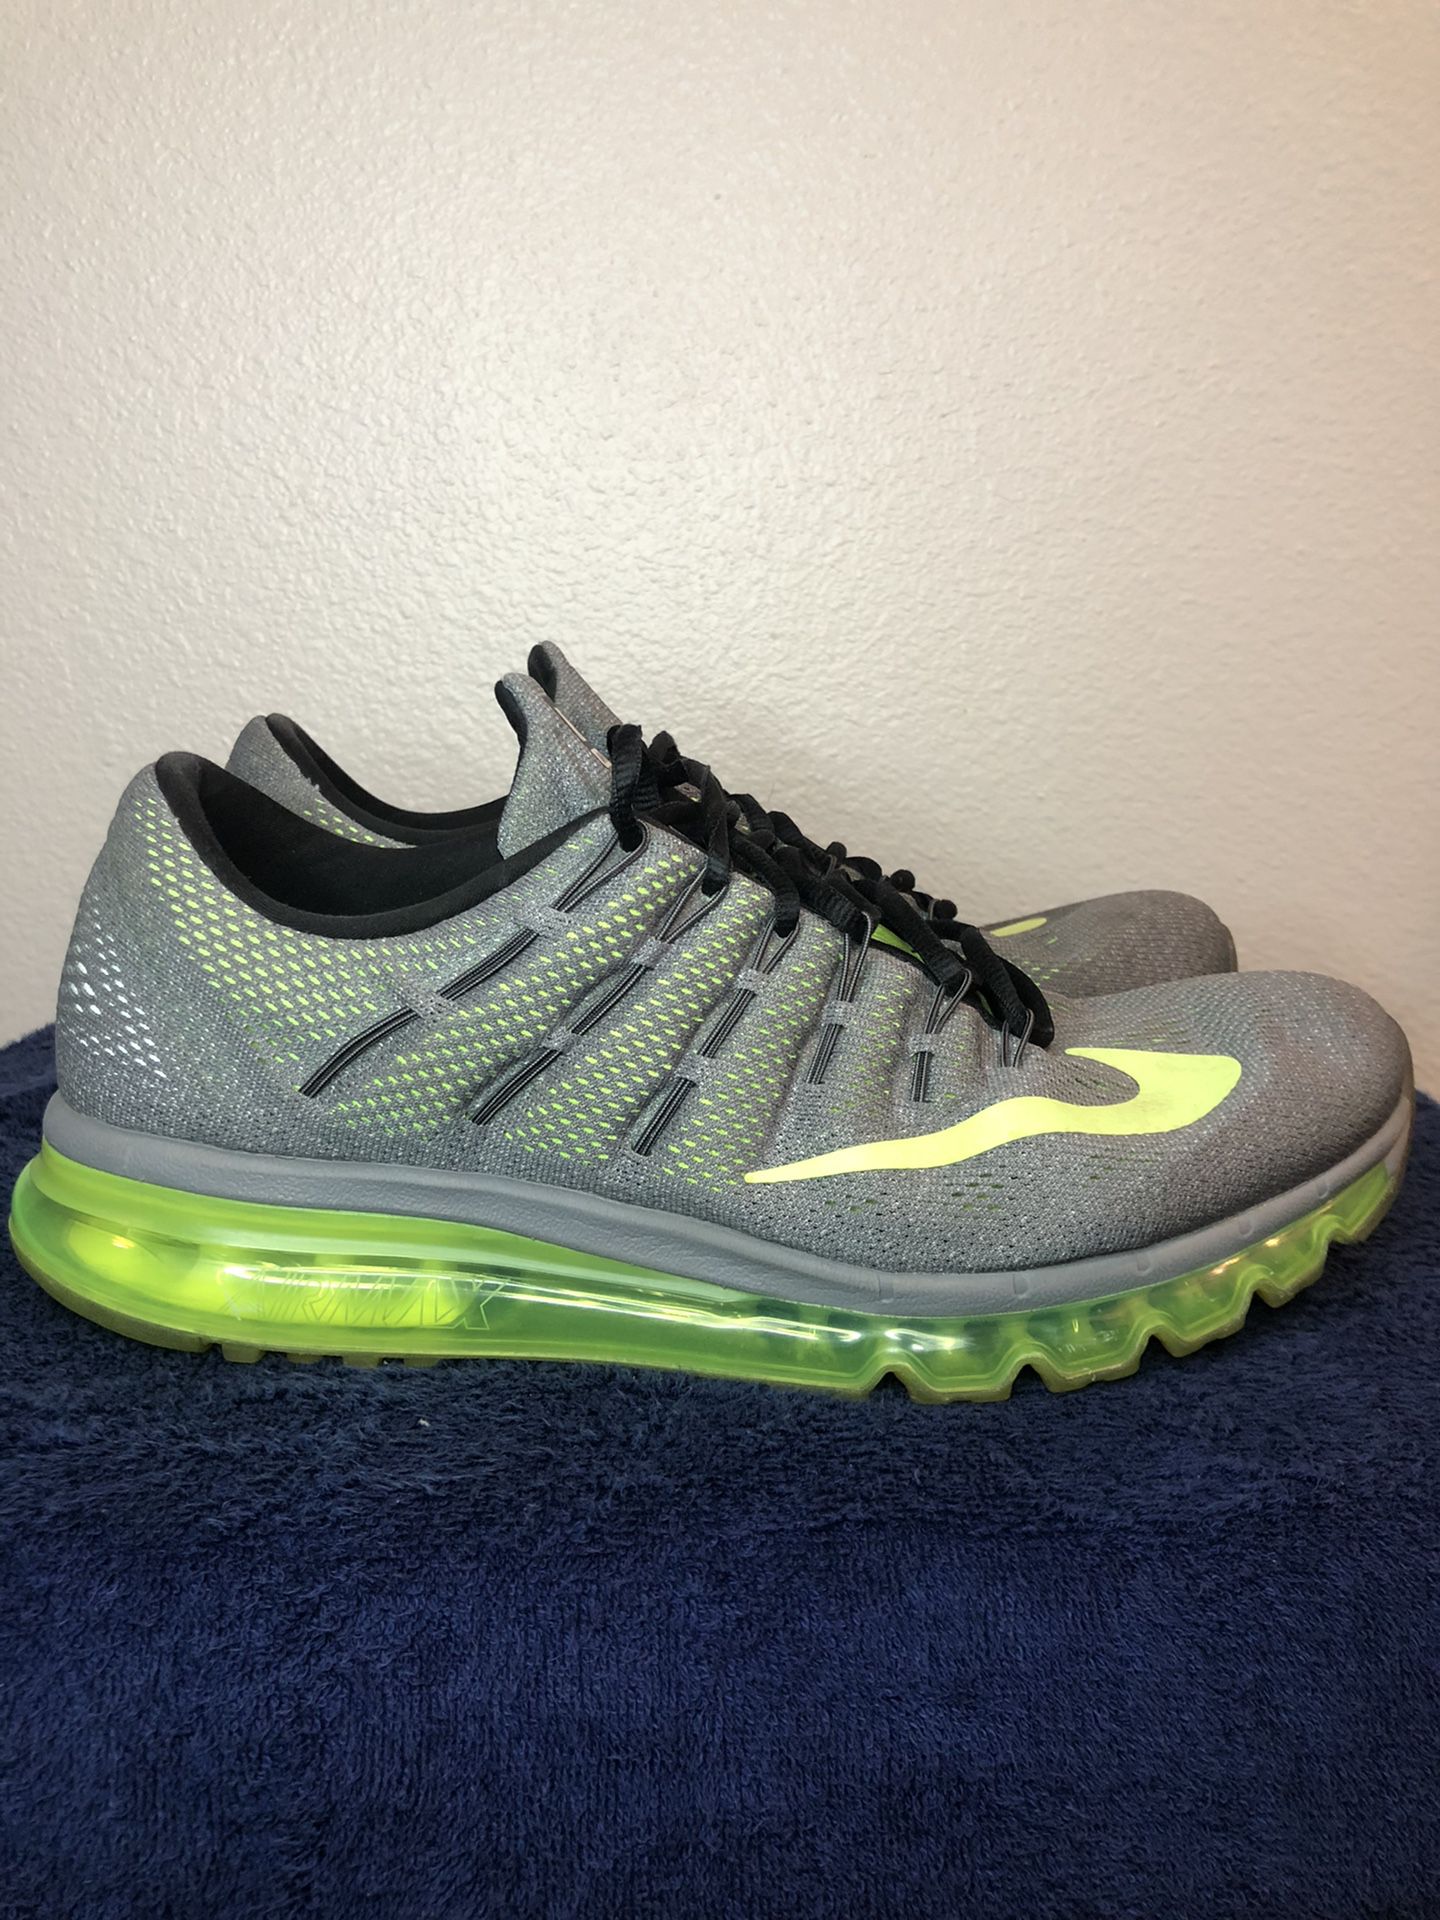 Vintage Nike Air Max 2016 Cool Grey Volt Men size 13 for Sale in Dallas, TX  - OfferUp